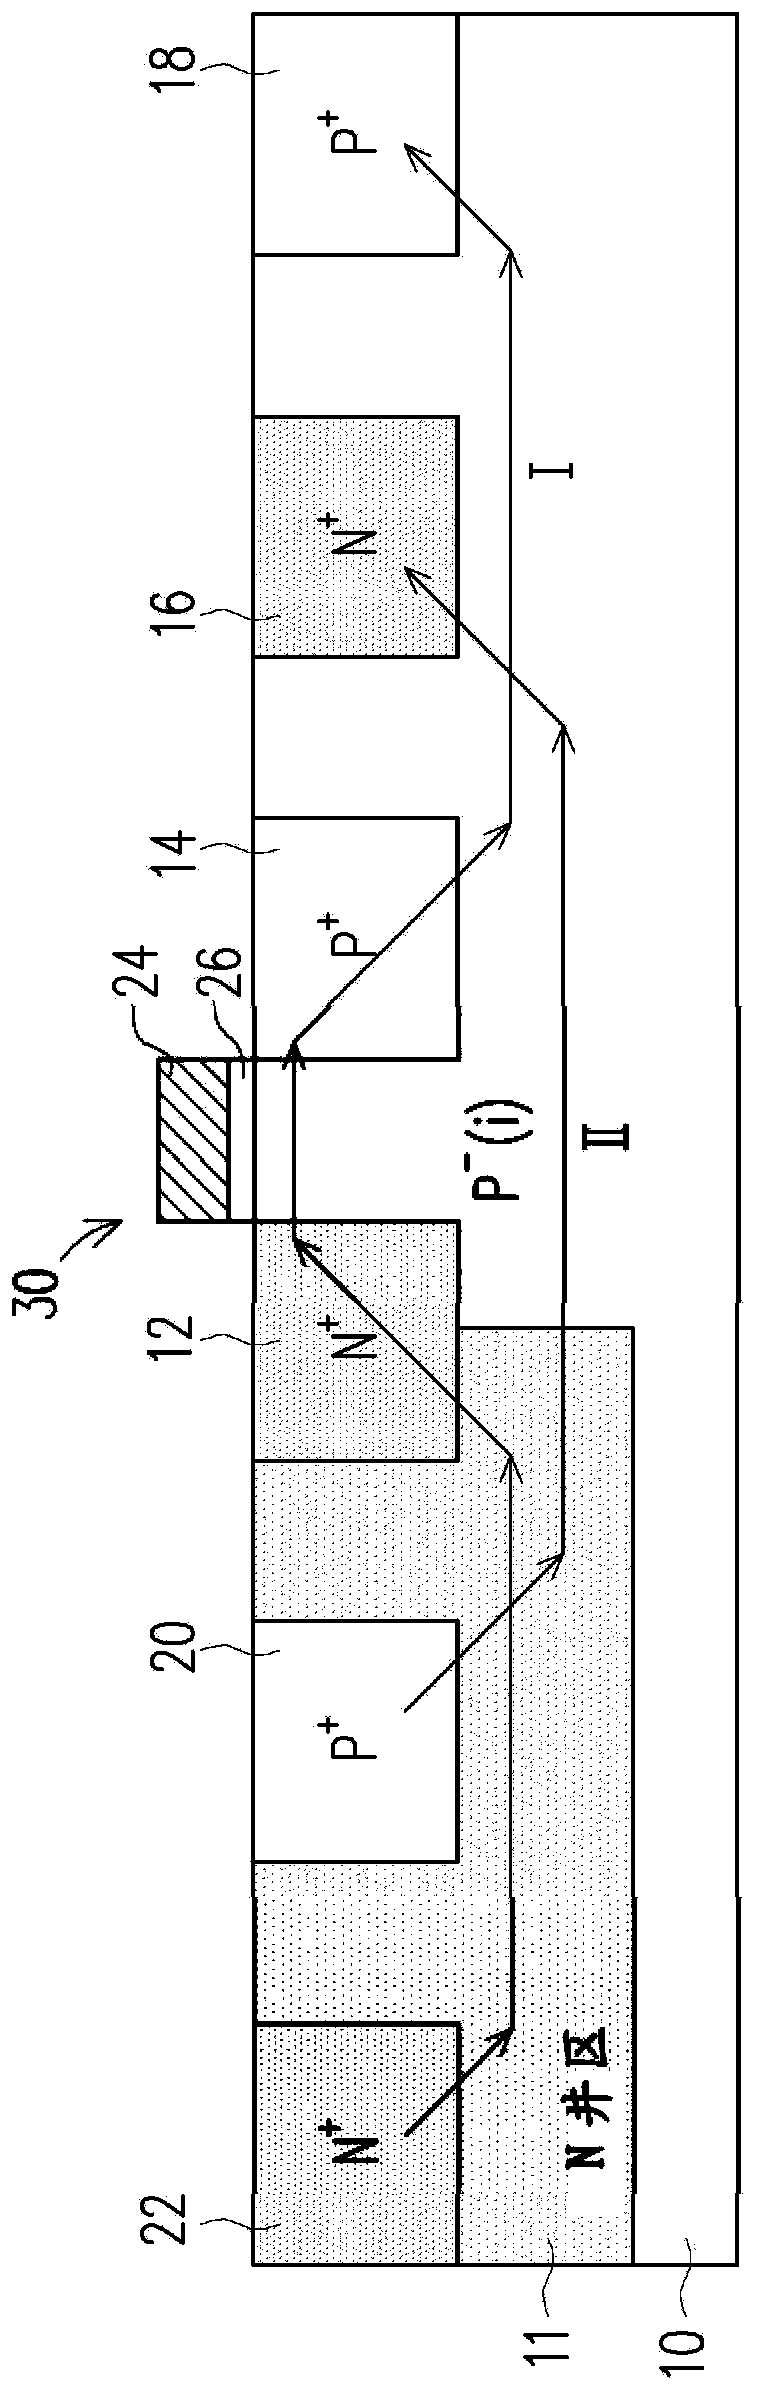 Electrostatic discharge protection circuit device